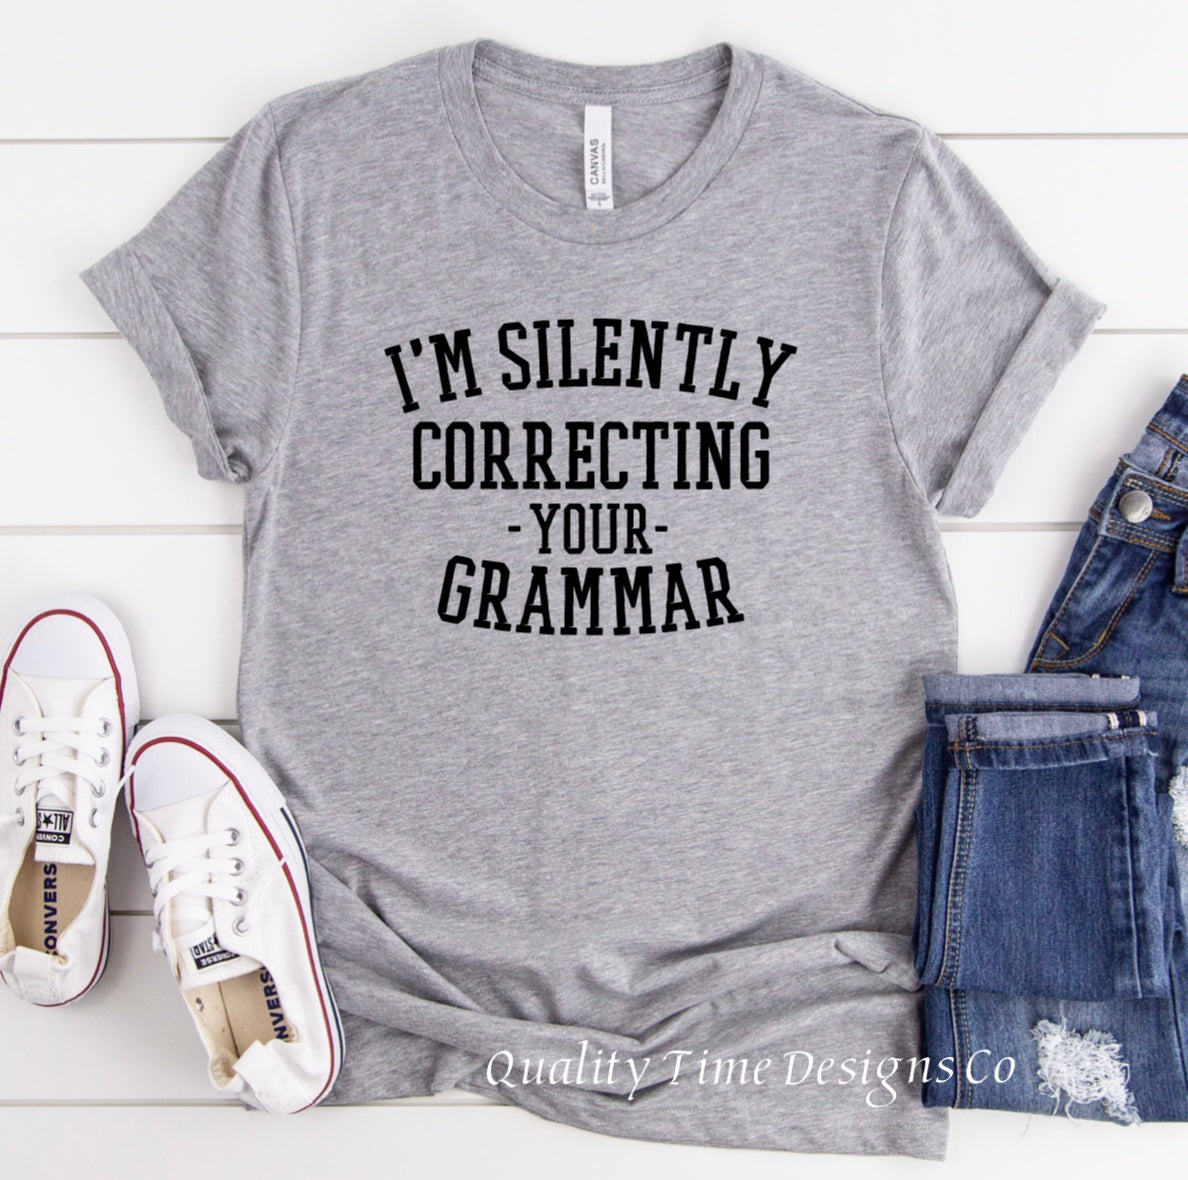 I’m silently correcting your grammar t-shirt 